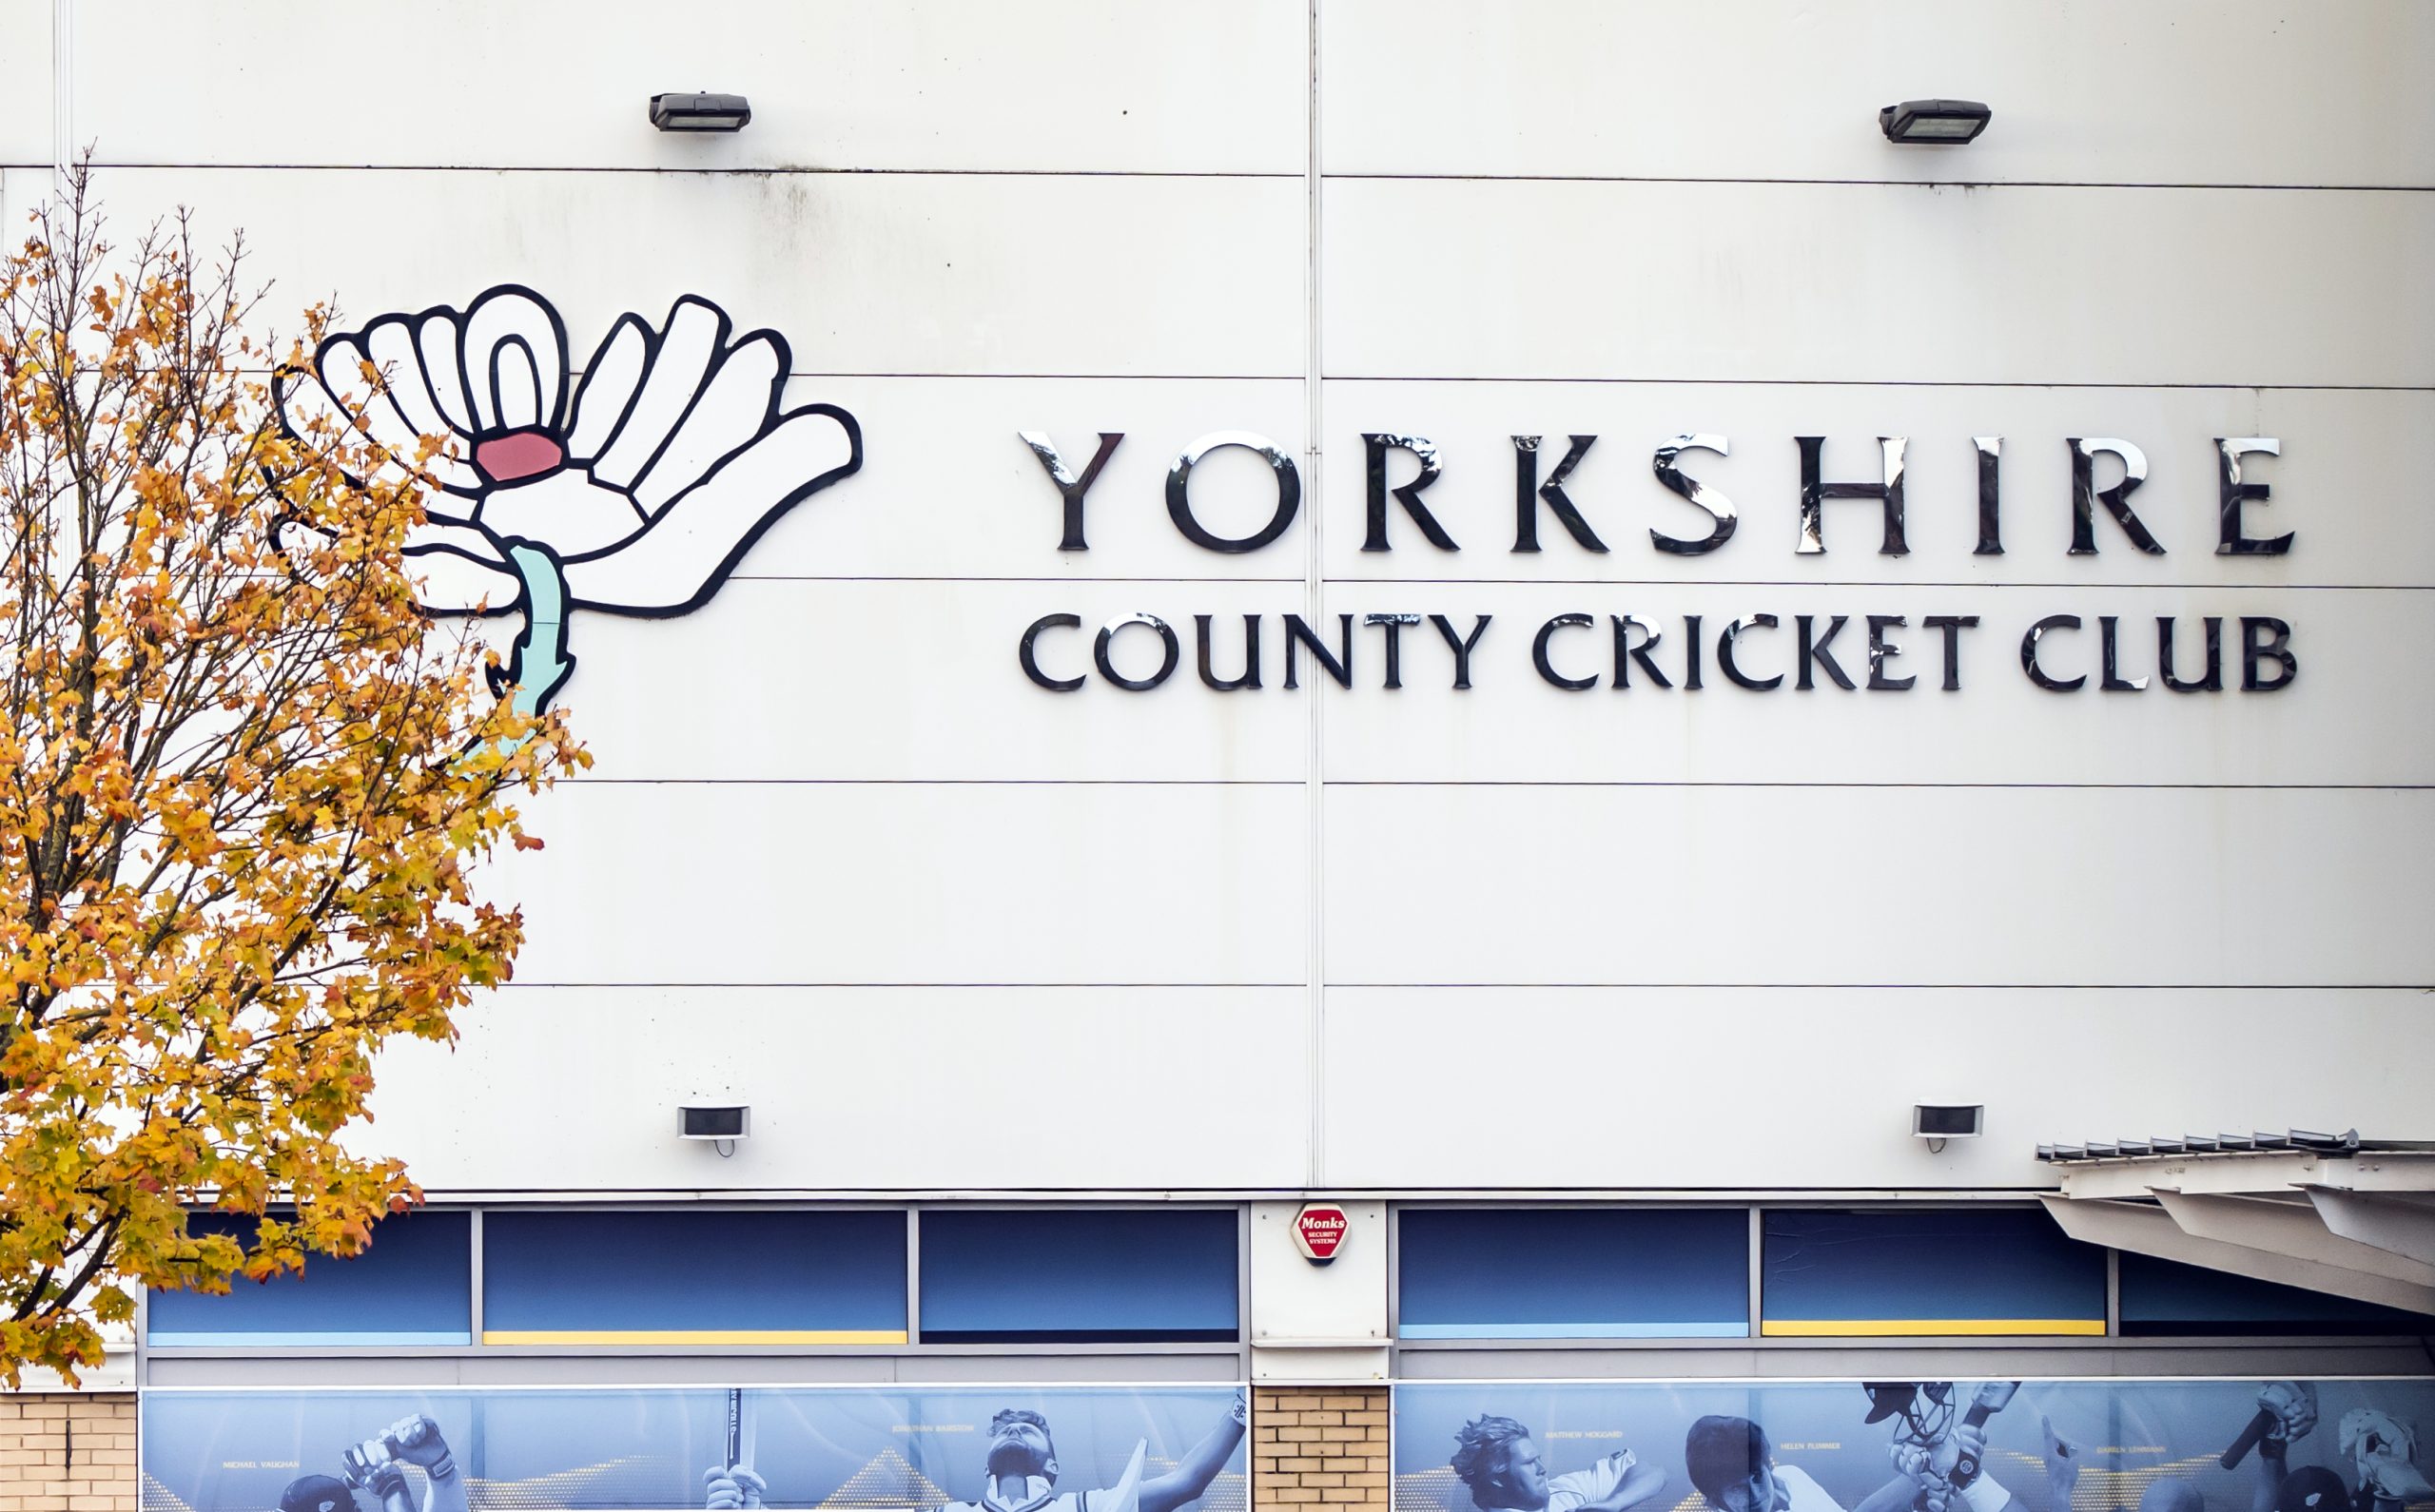 ECB wants Yorkshire fined £500,000 and deducted points over Azeem Rafiq case